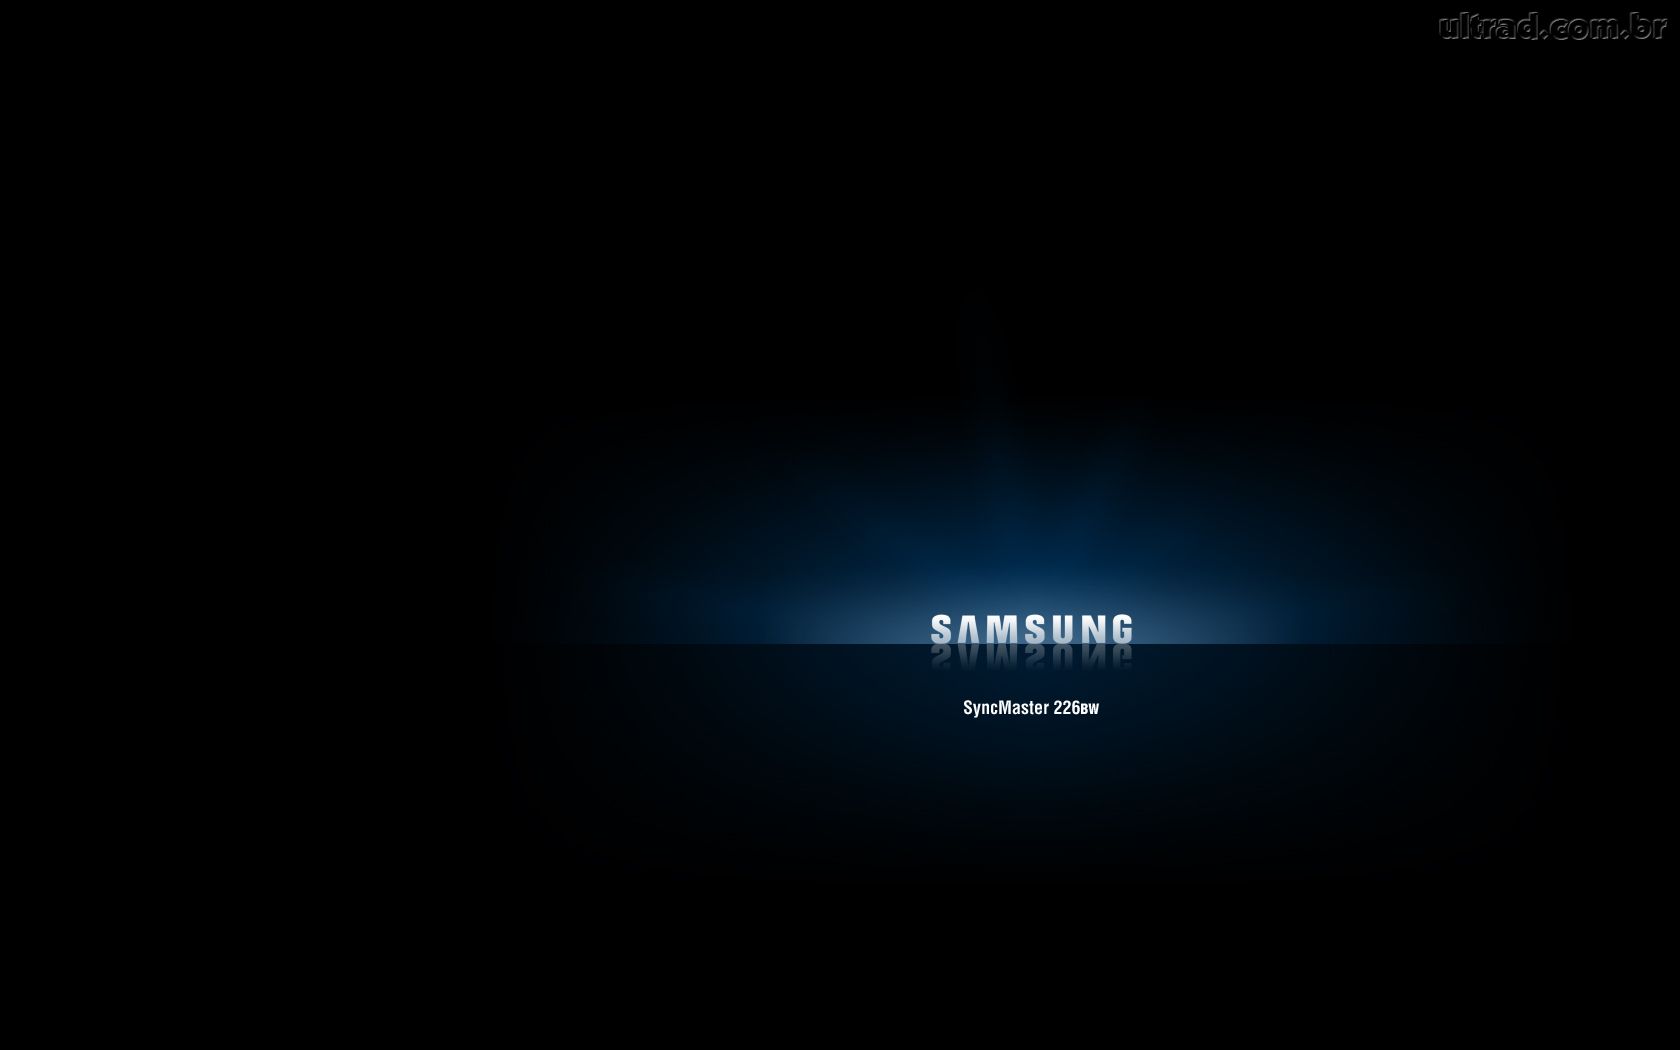 Samsung HD DeskScreen Photos Wallpapers and Pictures download 1680x1050